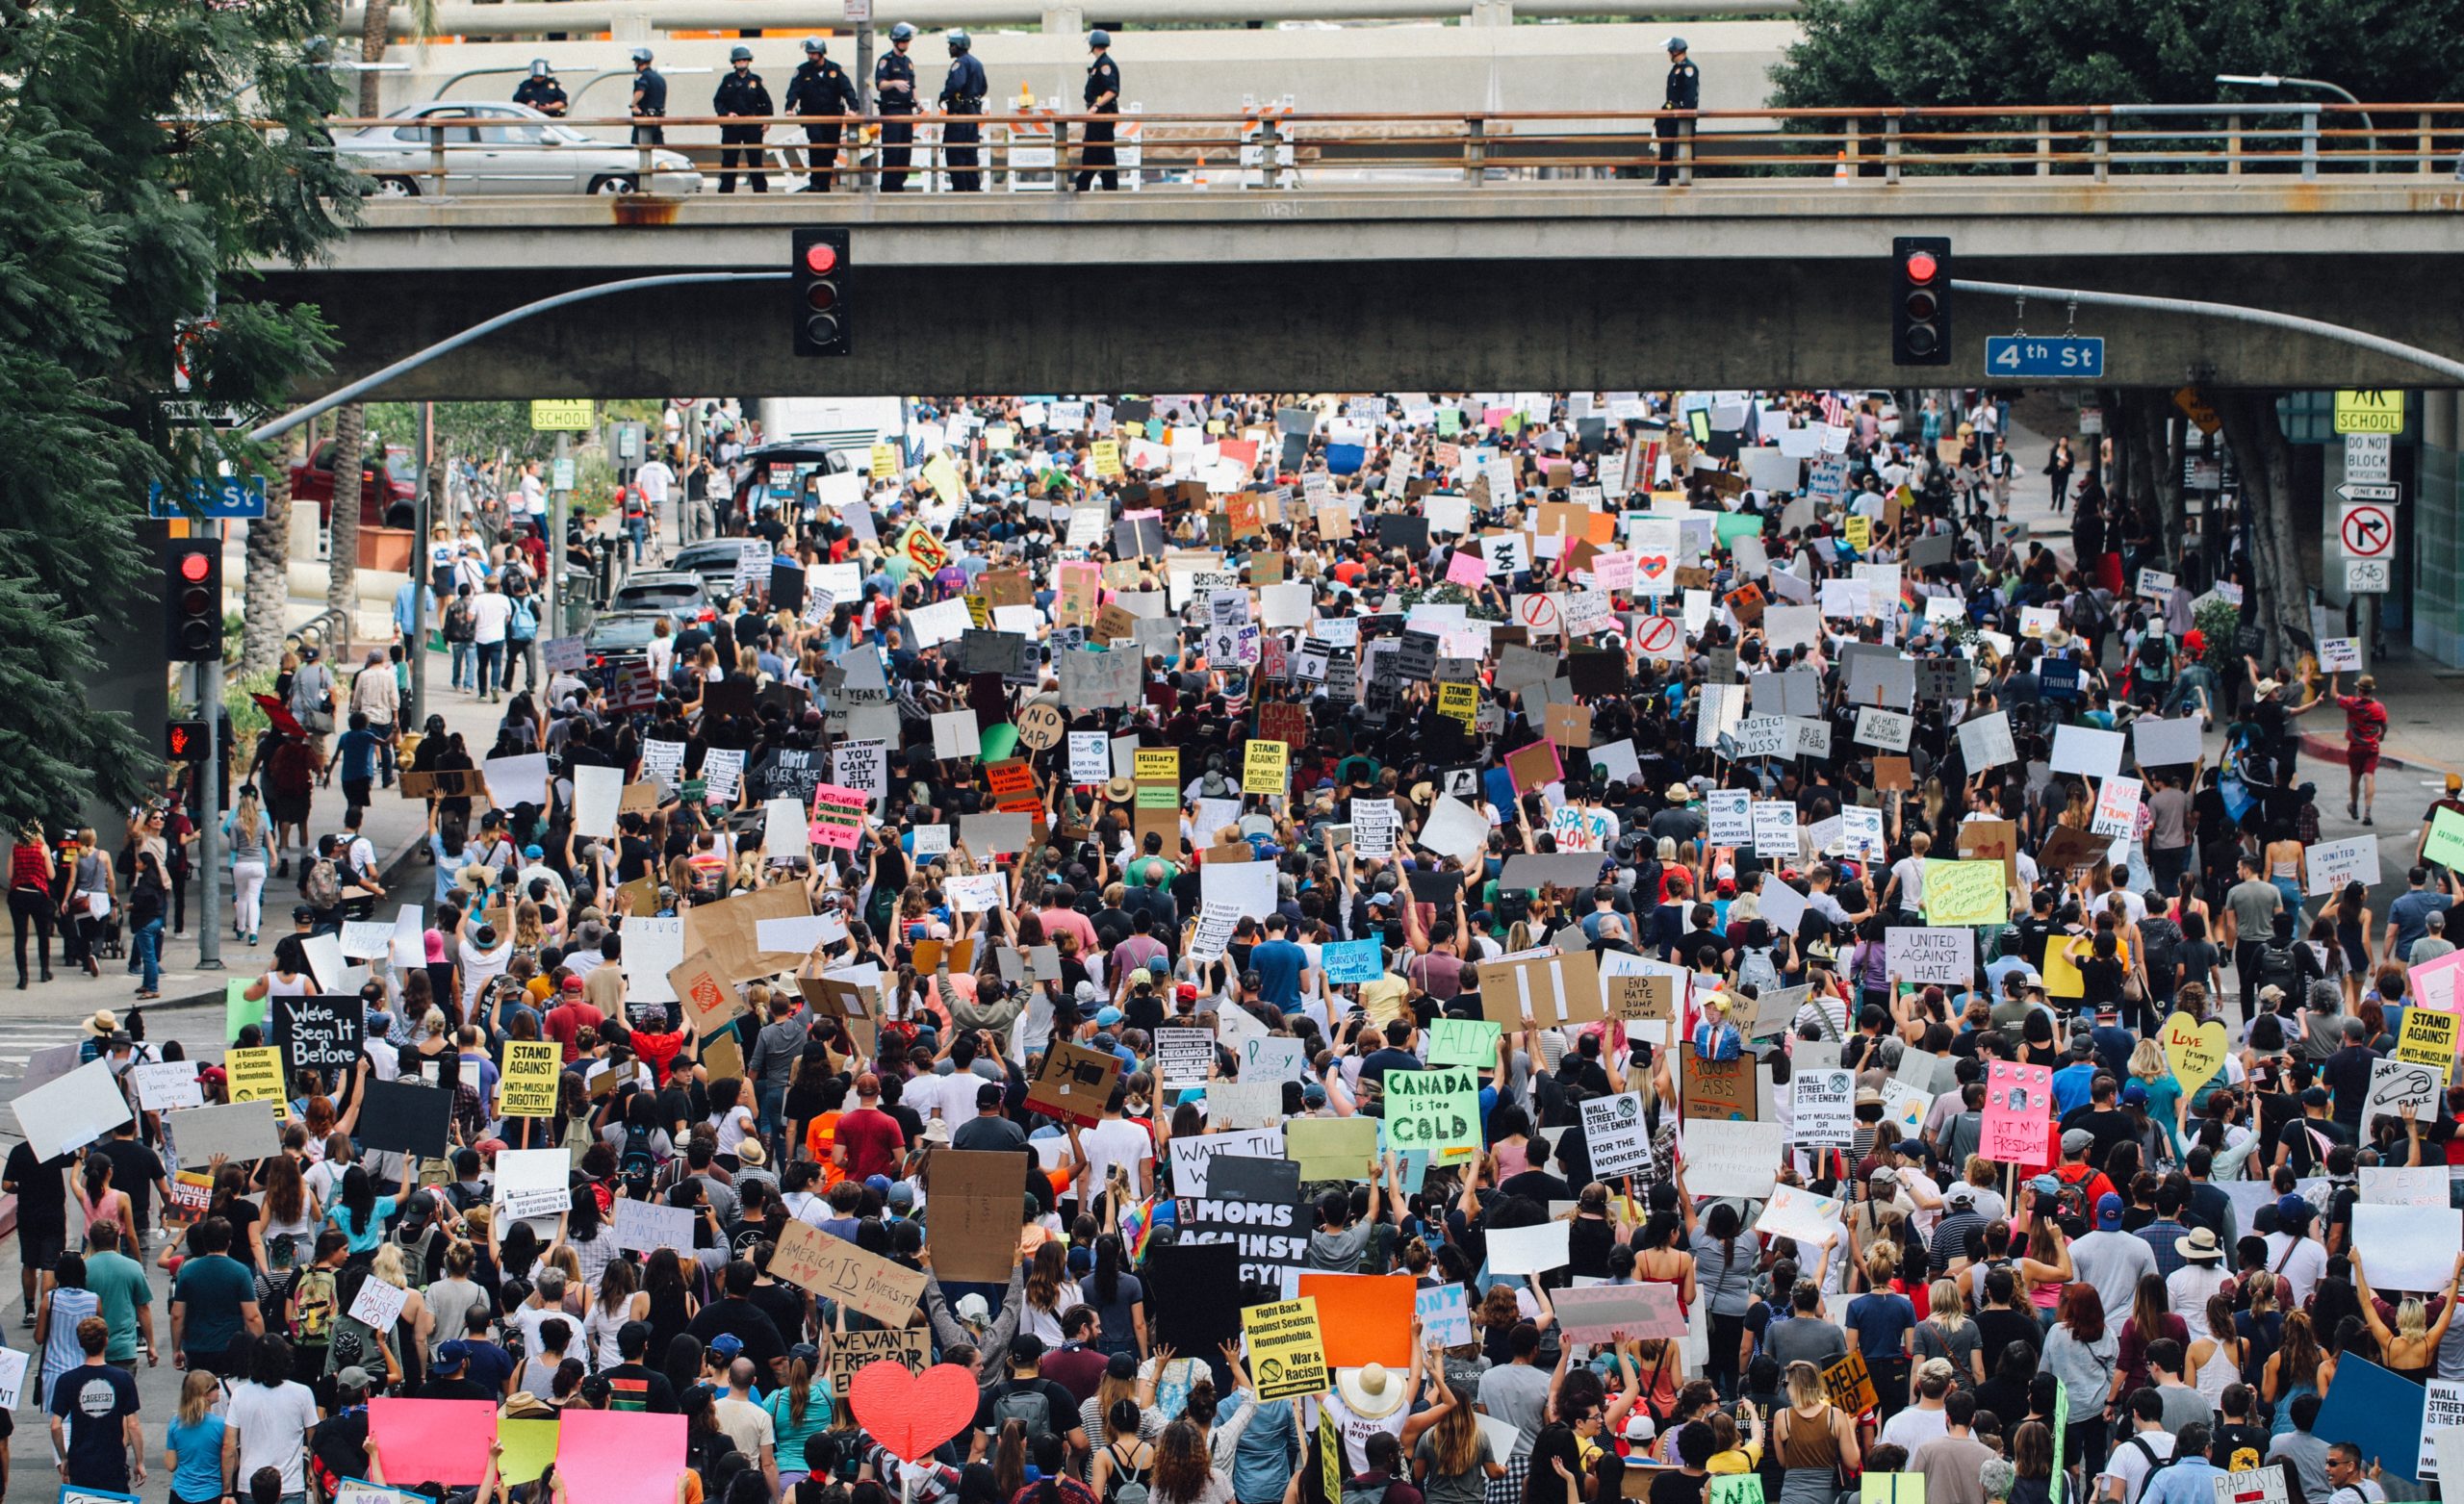 mass of people holding signs in a protest march walking under a bridge with police above on the bridge